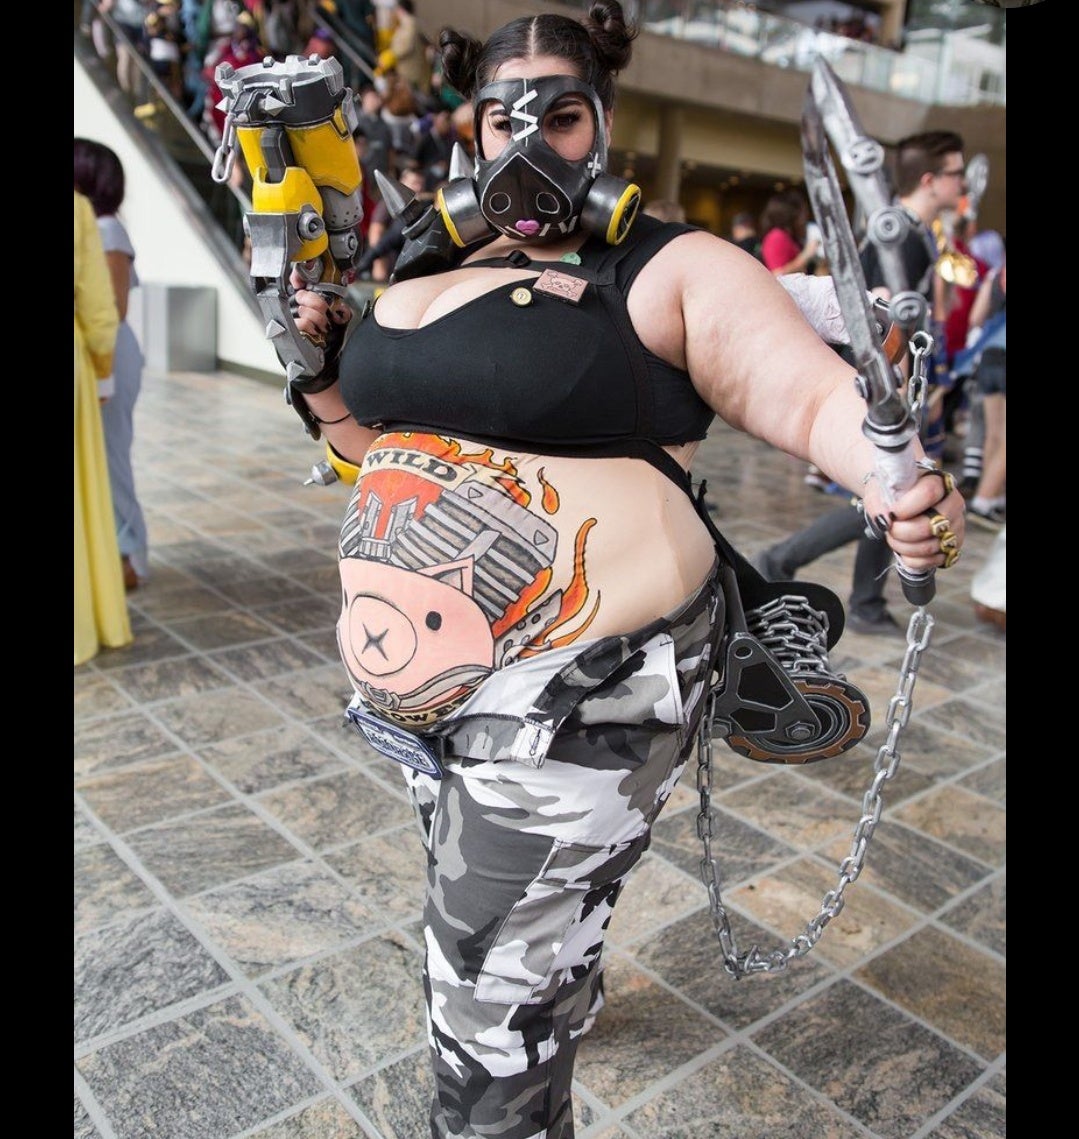 Who Is This Shes Cosplaying Roadhog From Overwatc